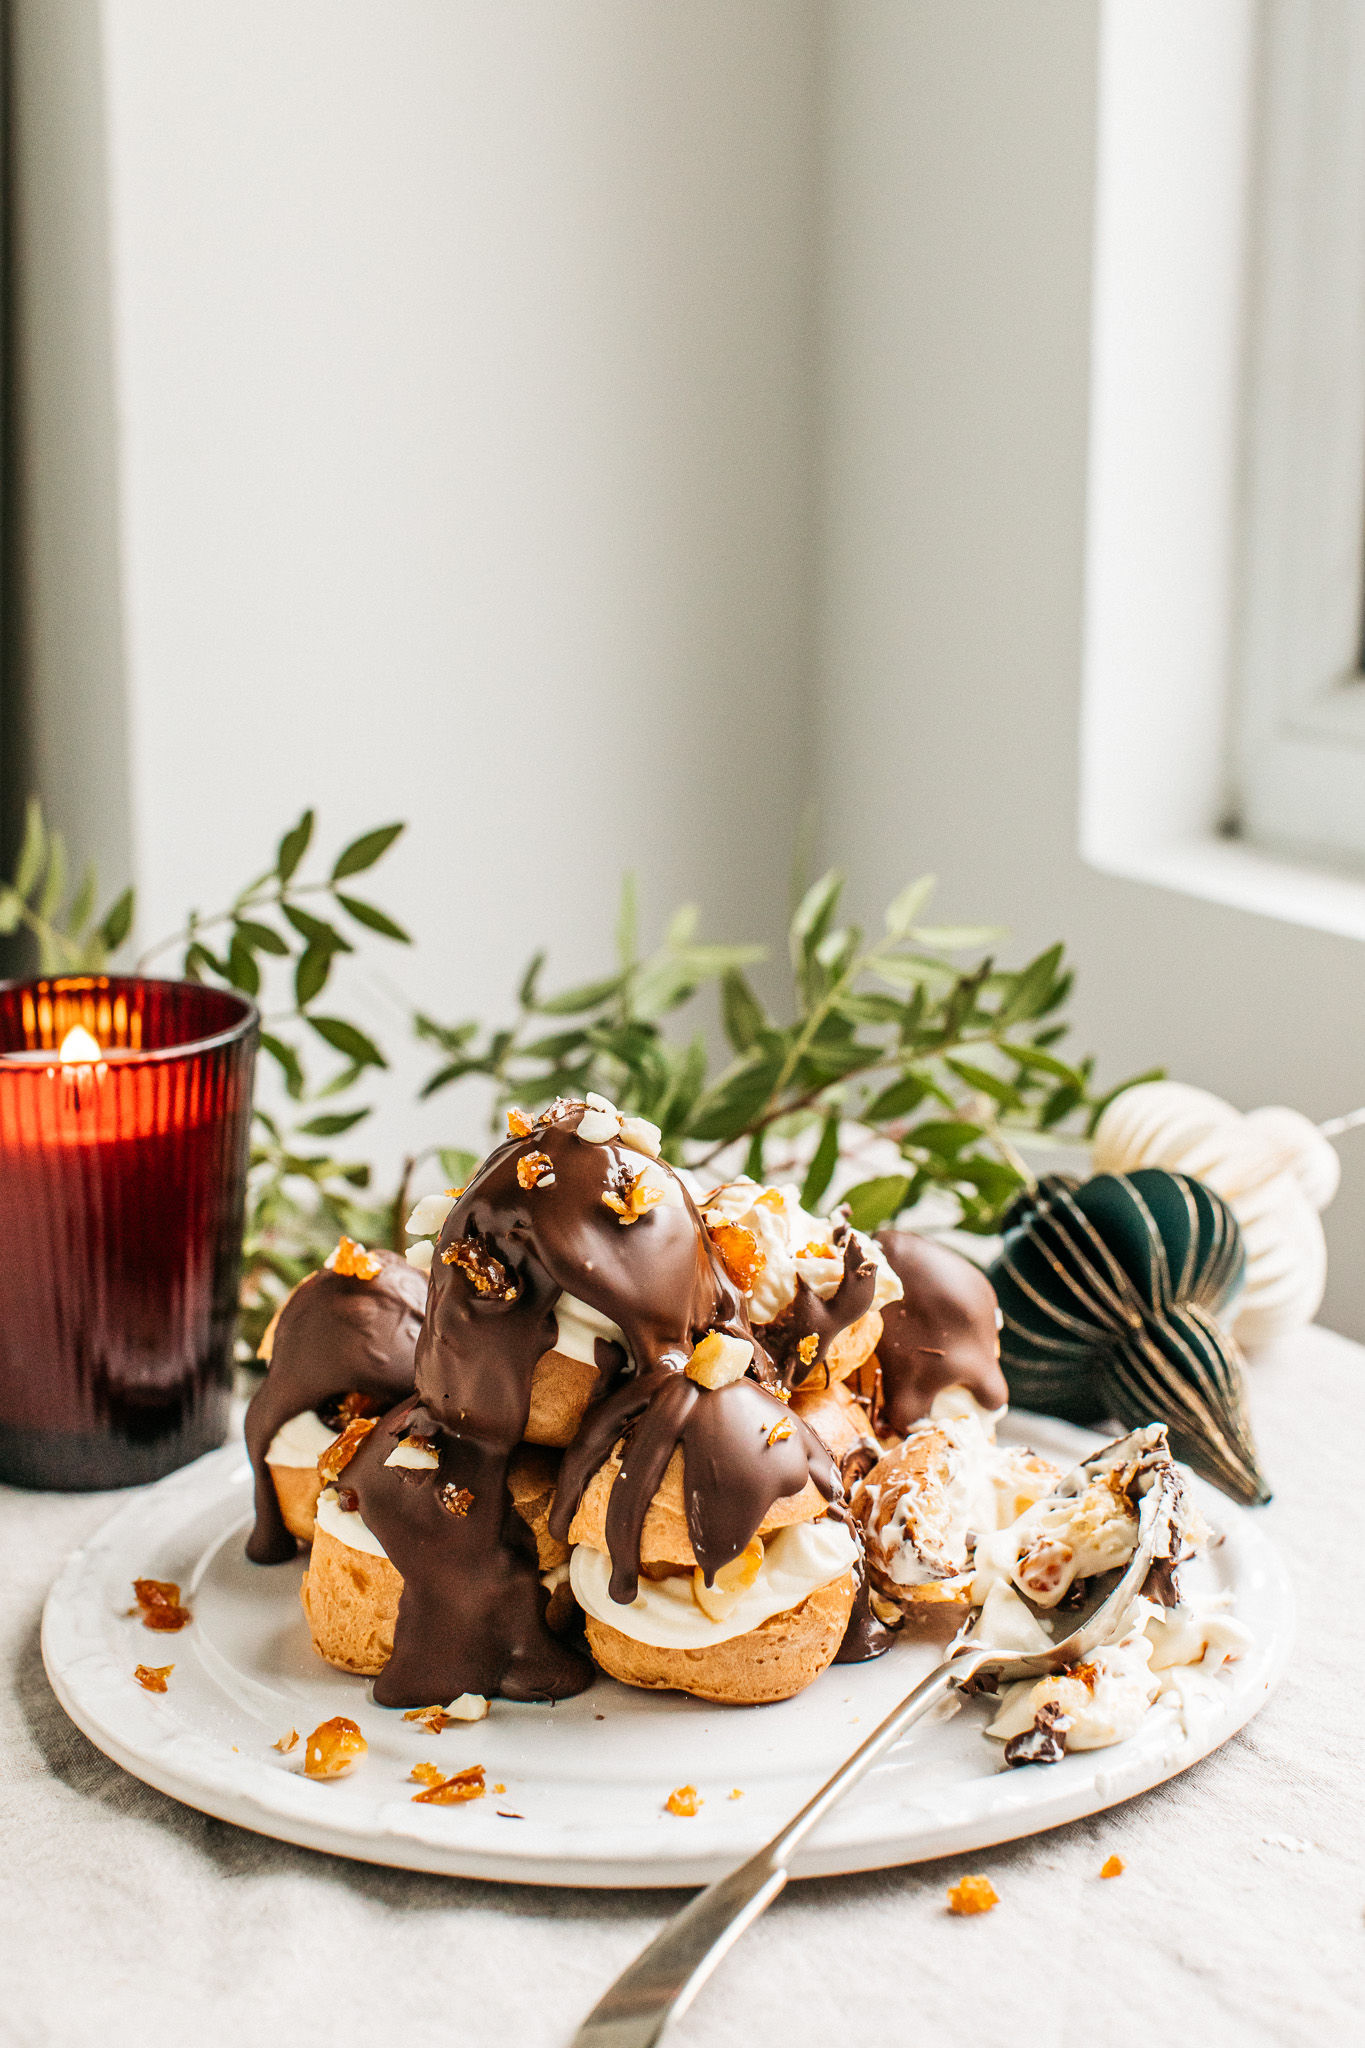 Gluten-free profiteroles covered in chocolate with a spoonful eaten